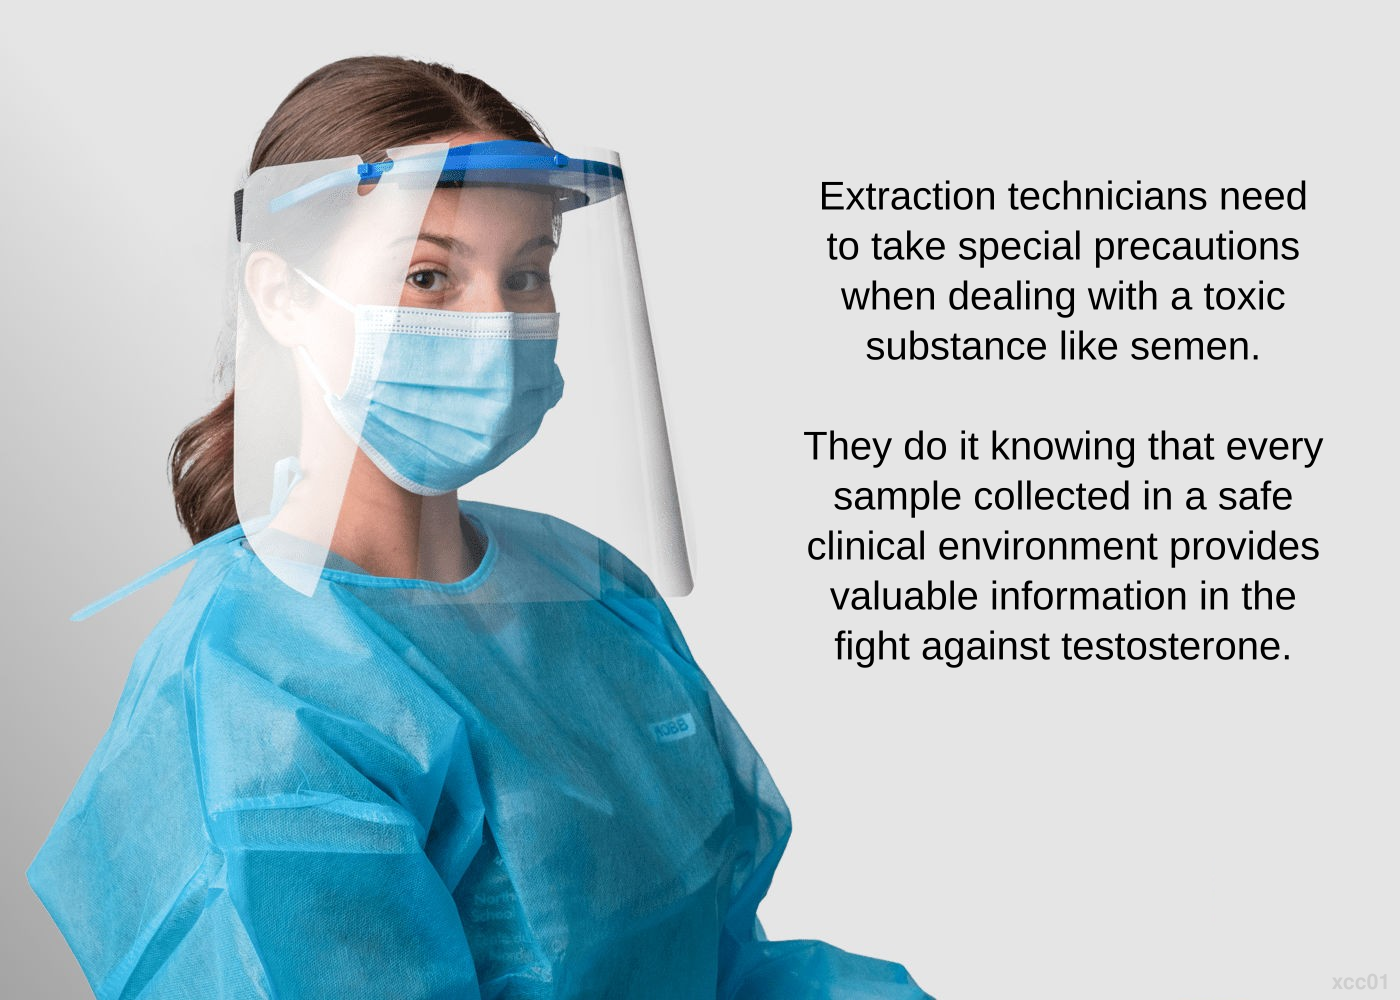 Extraction technicians need to take special precautions when dealing with a toxic substance like semen. They do it knowing that every sample collected in a safe clinical environment provides valuable information in the fight against testosterone.
